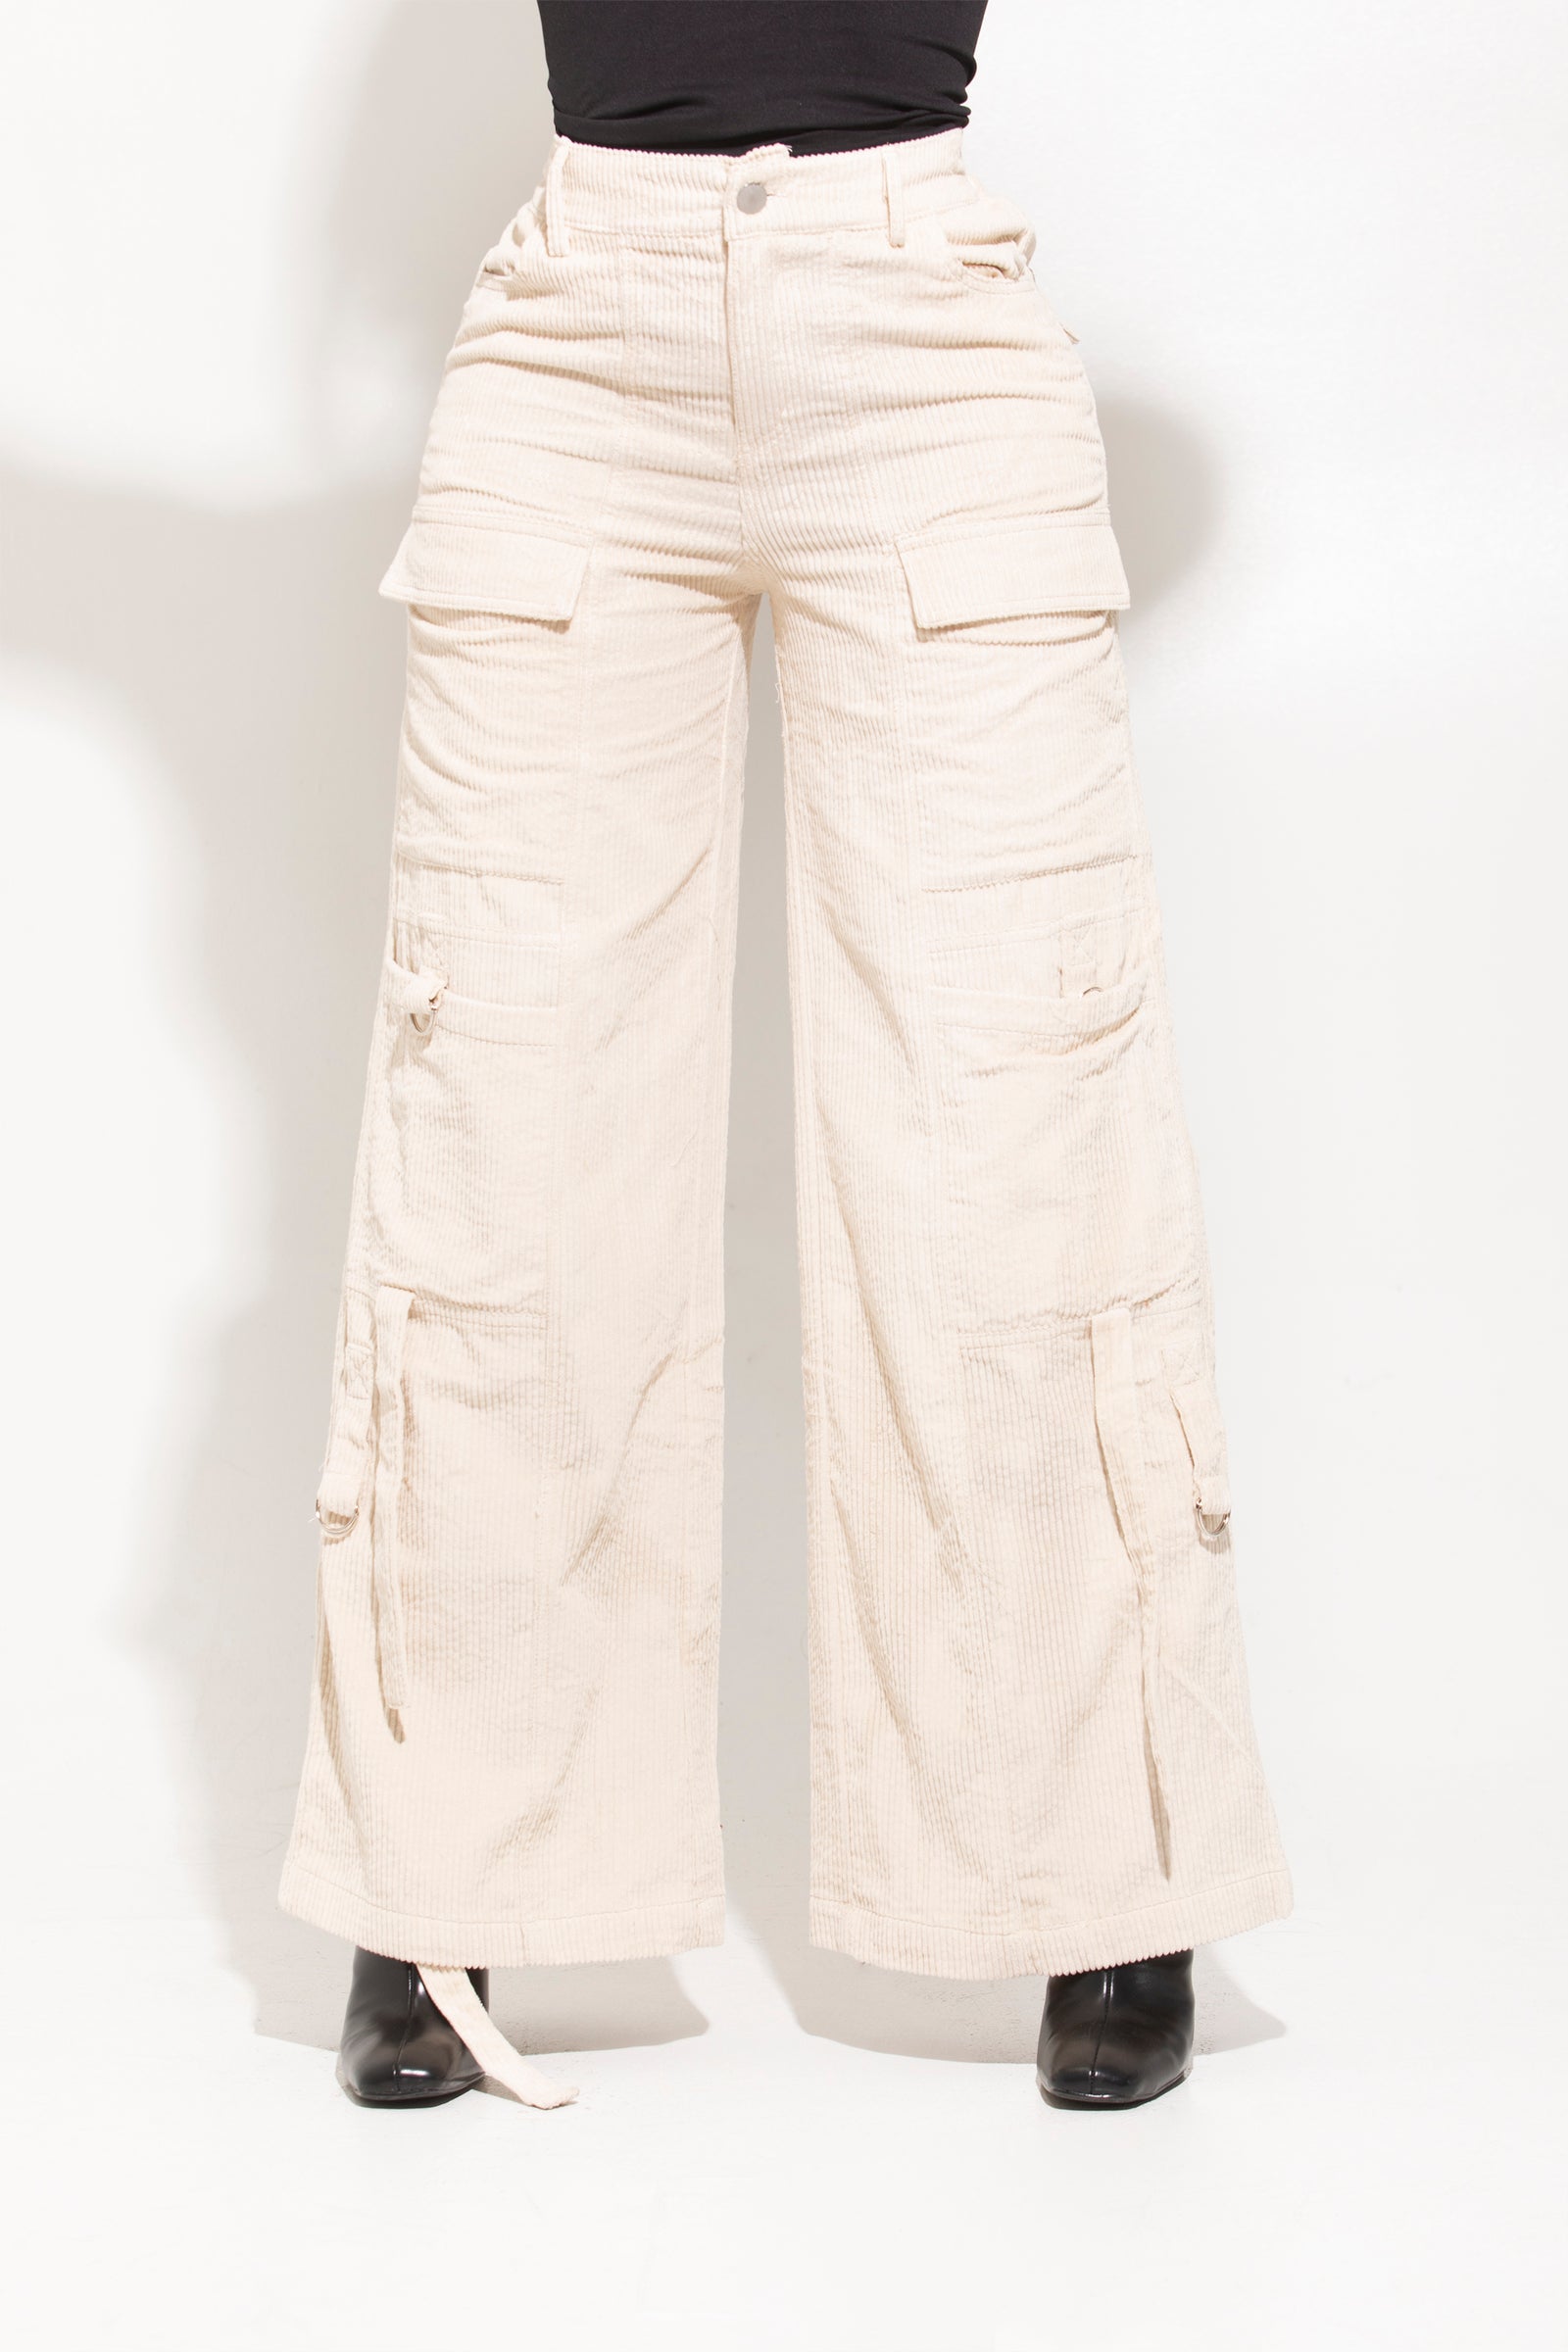 Navy Piping Detail Parachute Pants  Navy pants, Clothes for women, Relaxed  fit